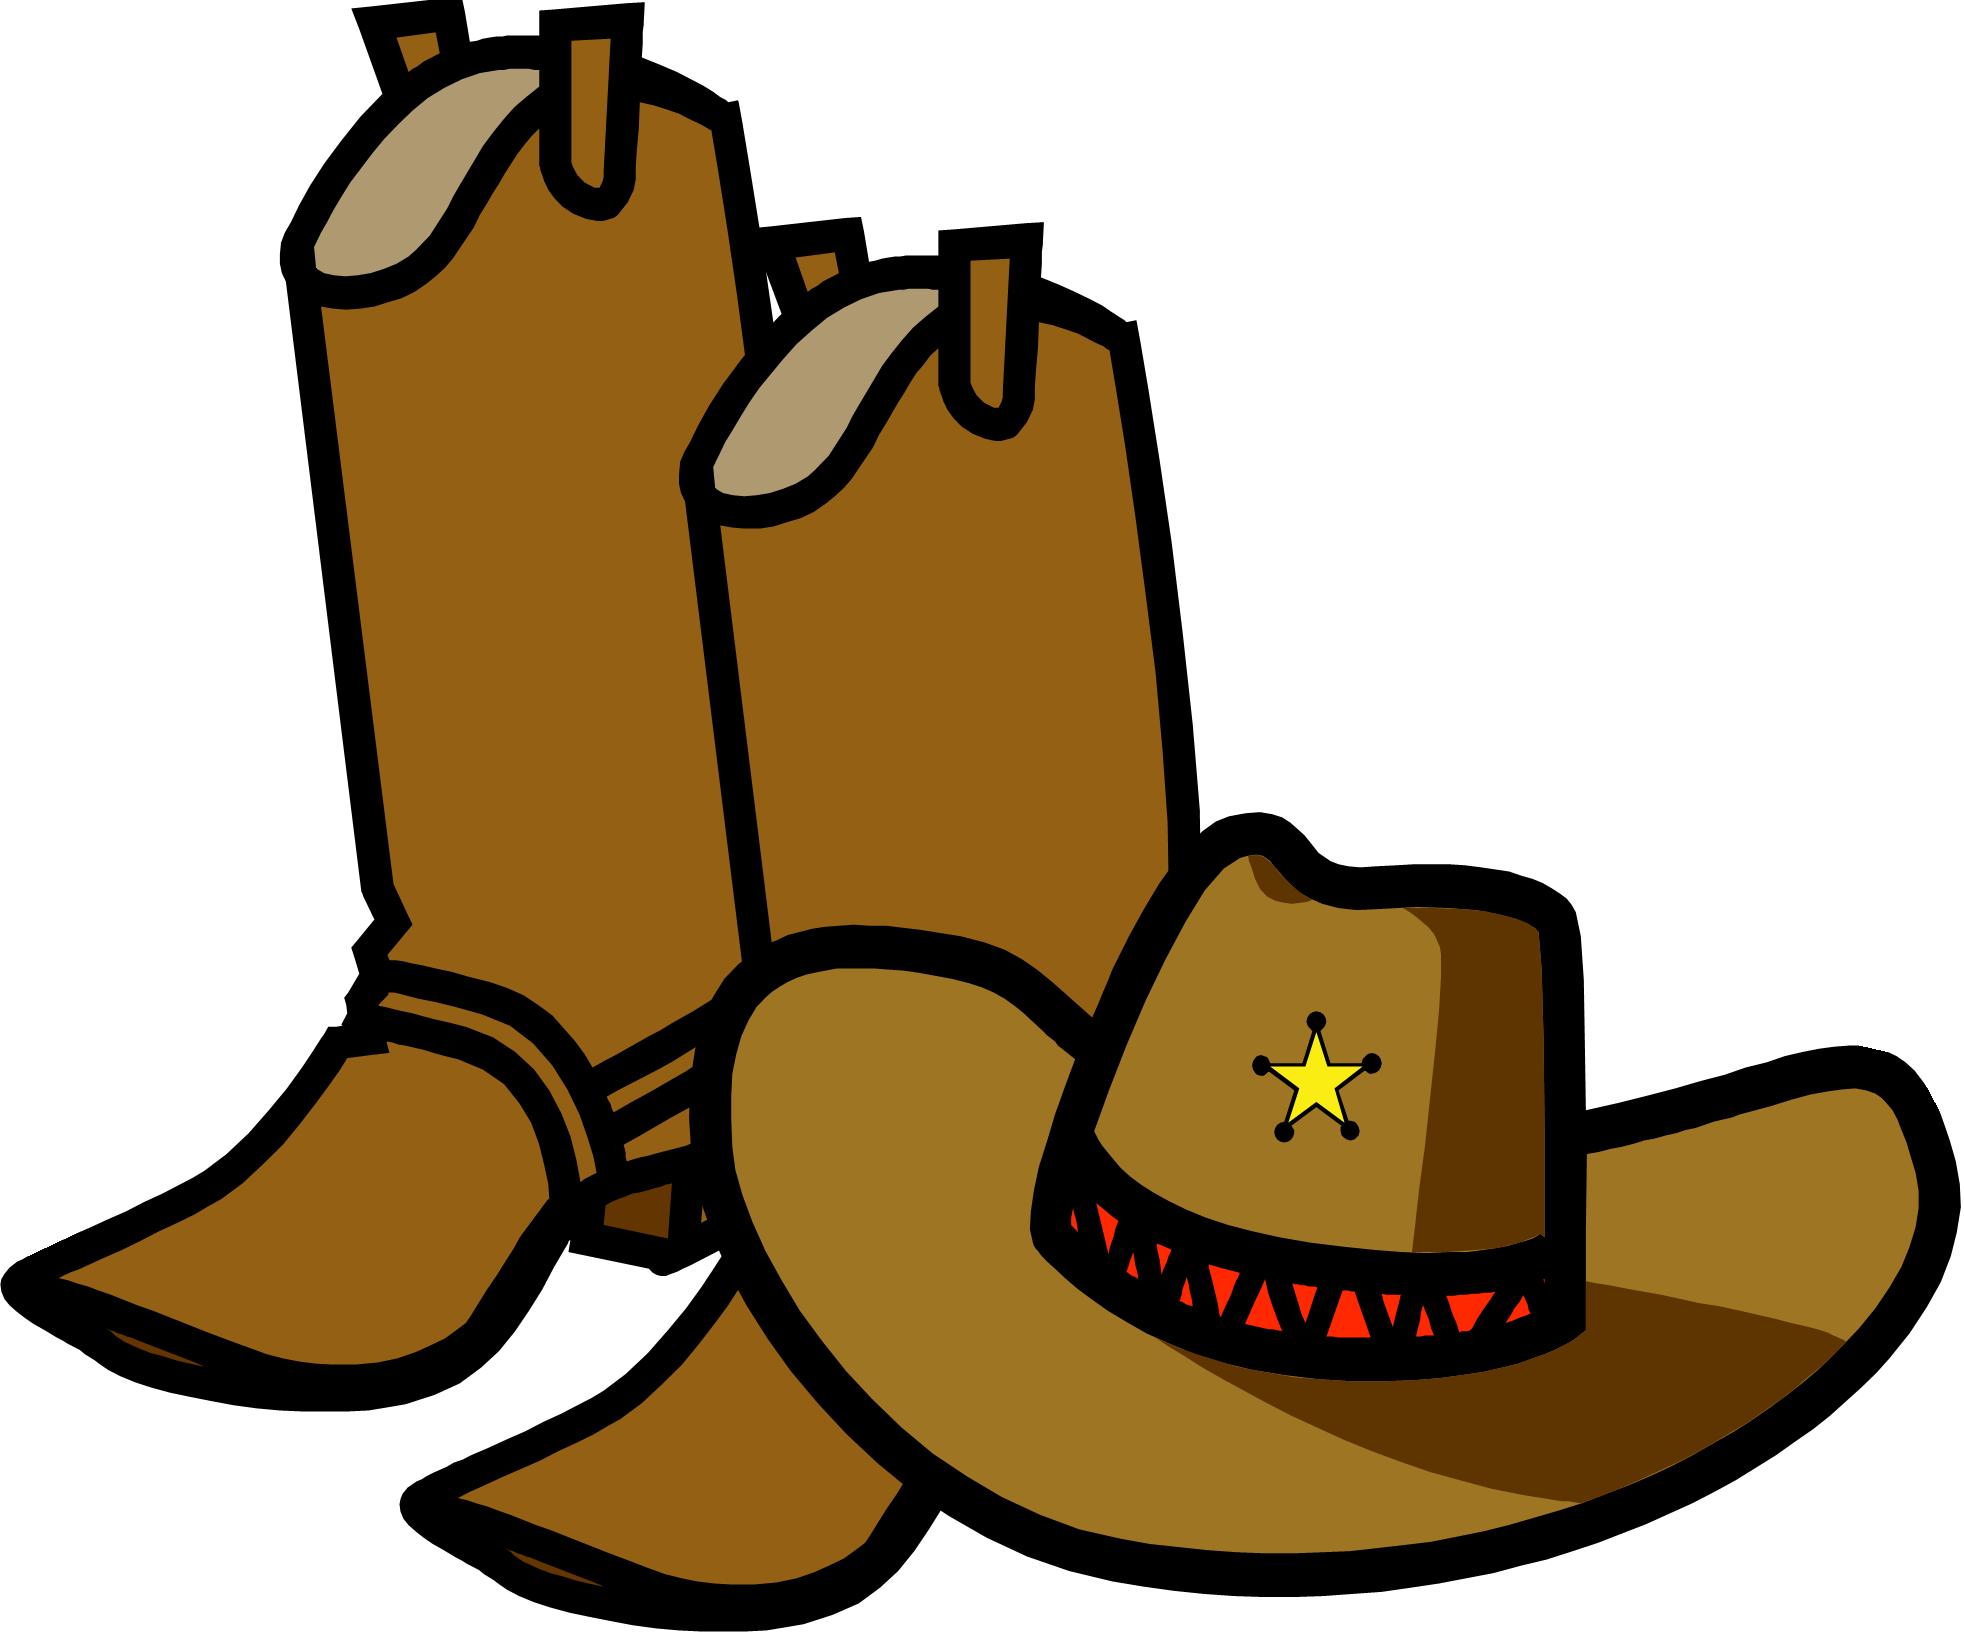 11 Cowboy Boots Images Free Cliparts That You Can Download To You